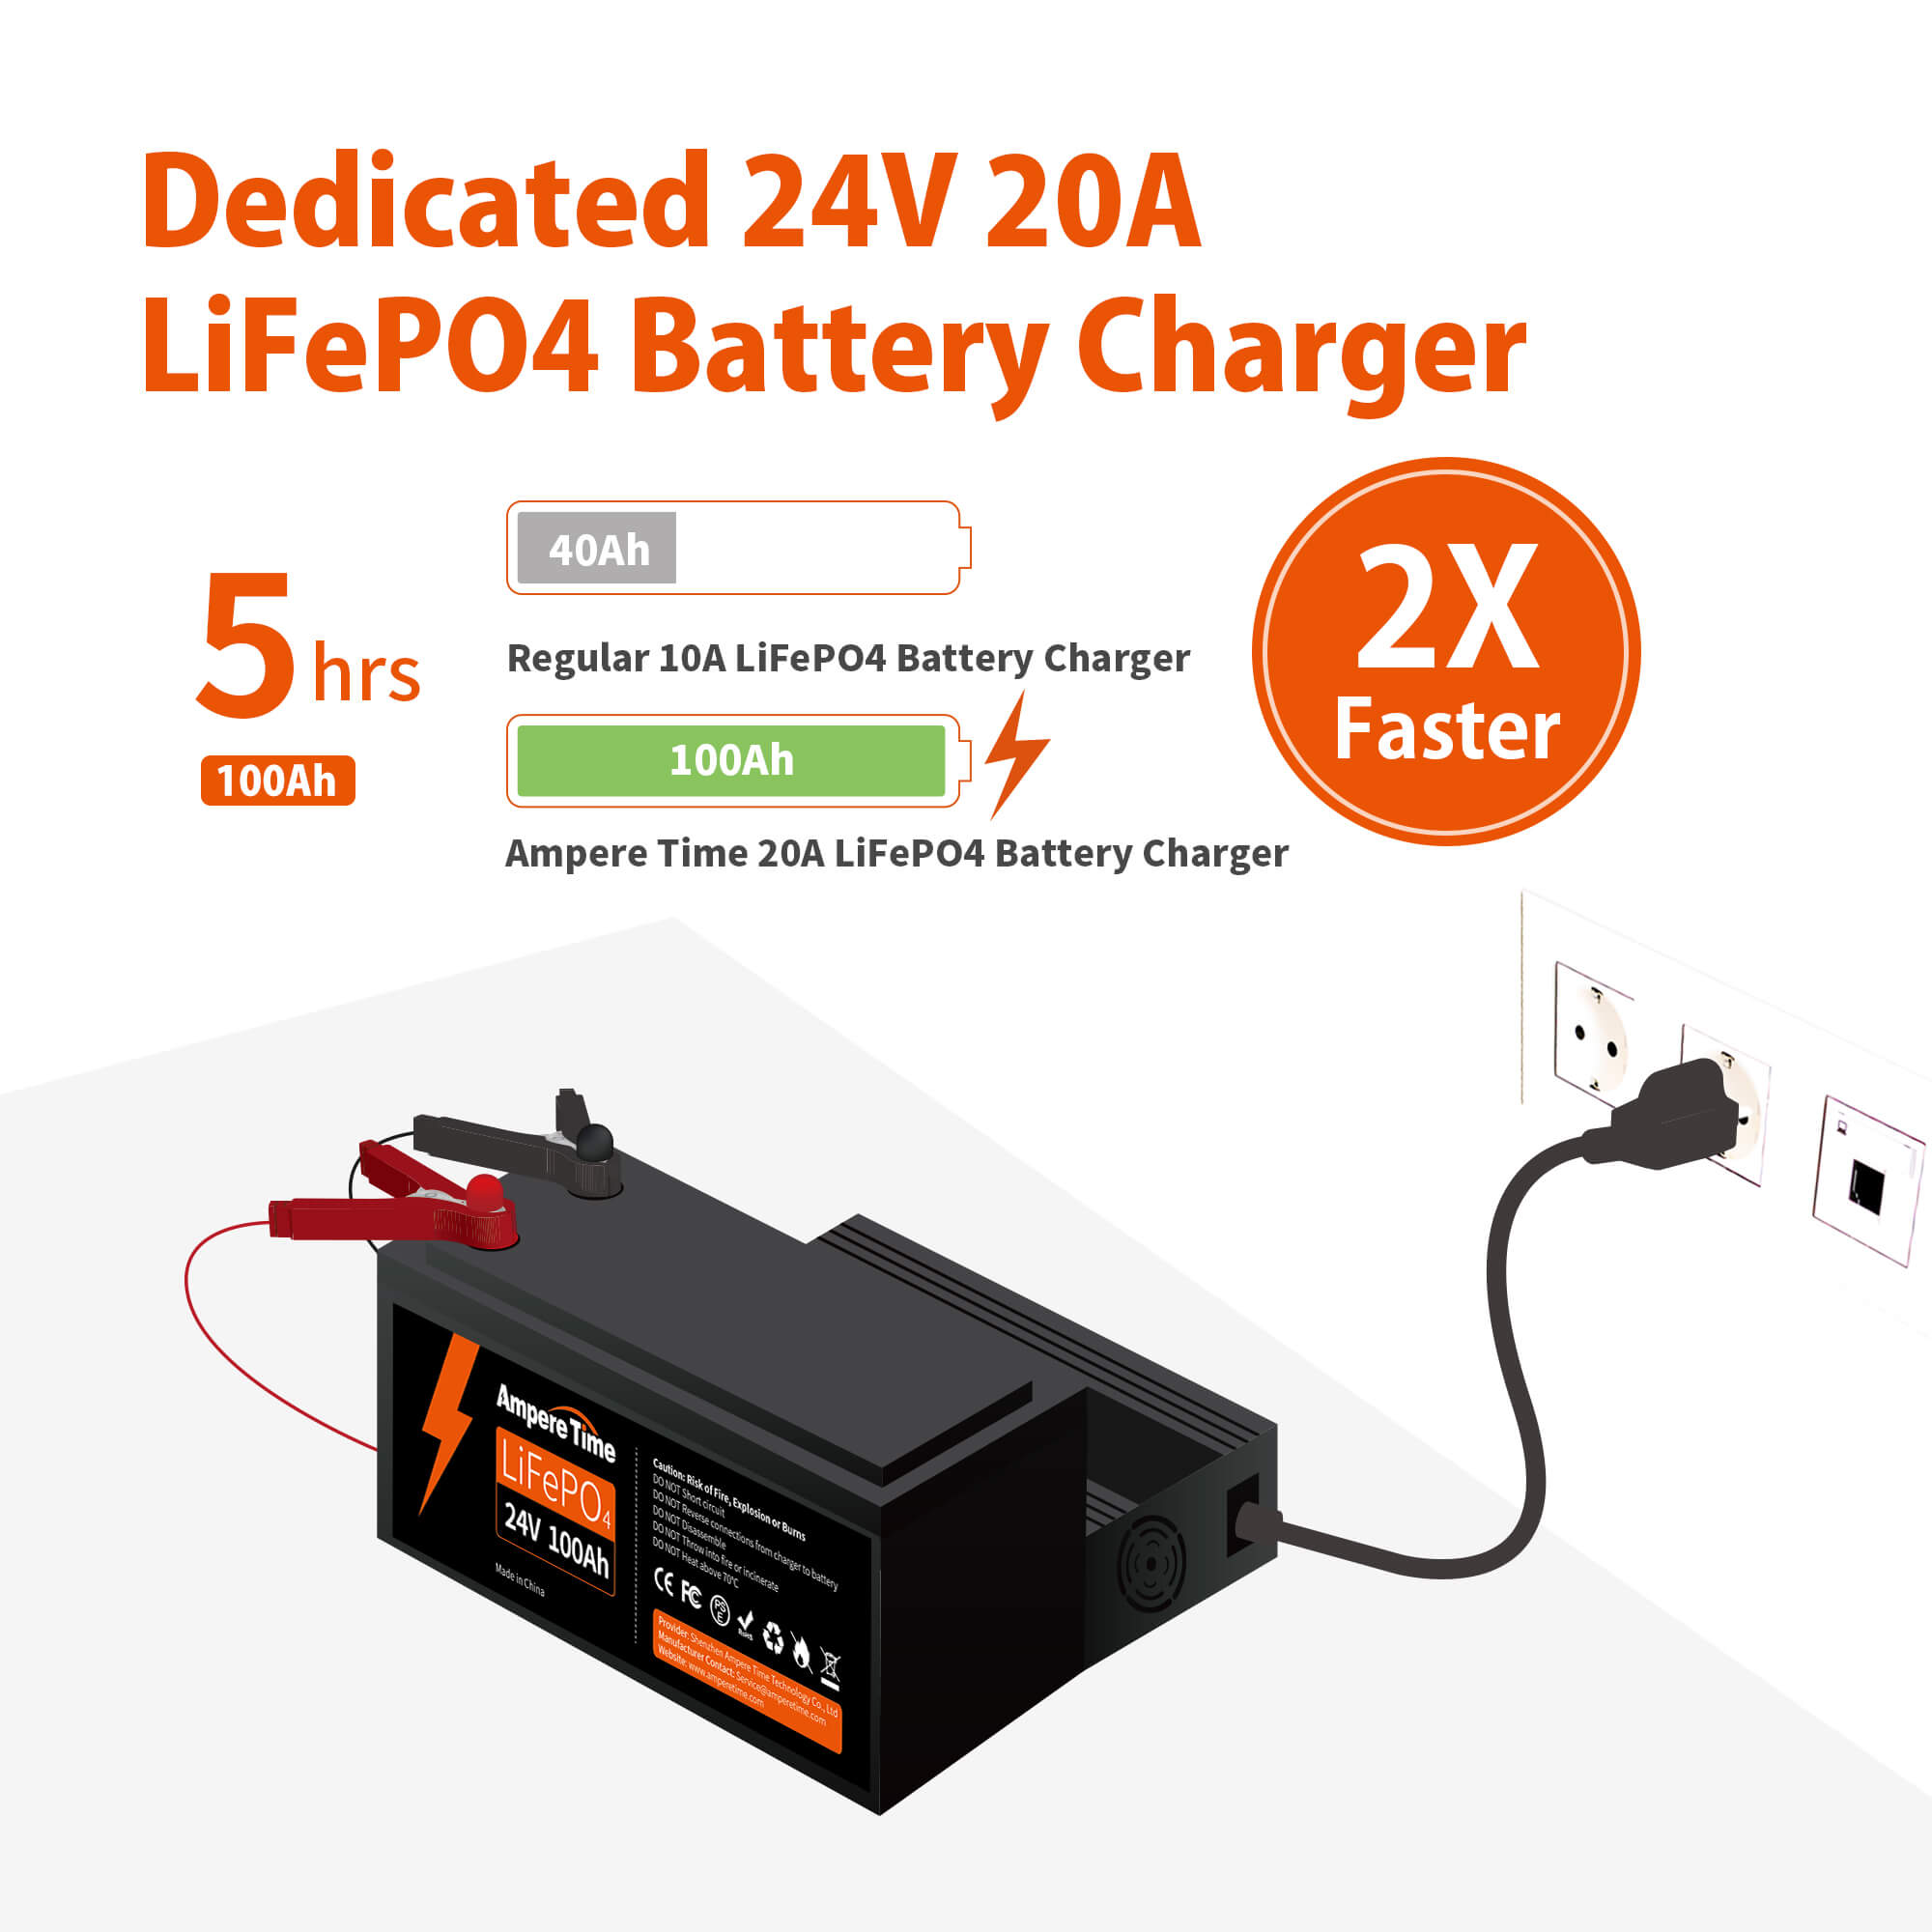 Ampere Time 29.2V 20A Dedicated LiFePO4 Battery Charger